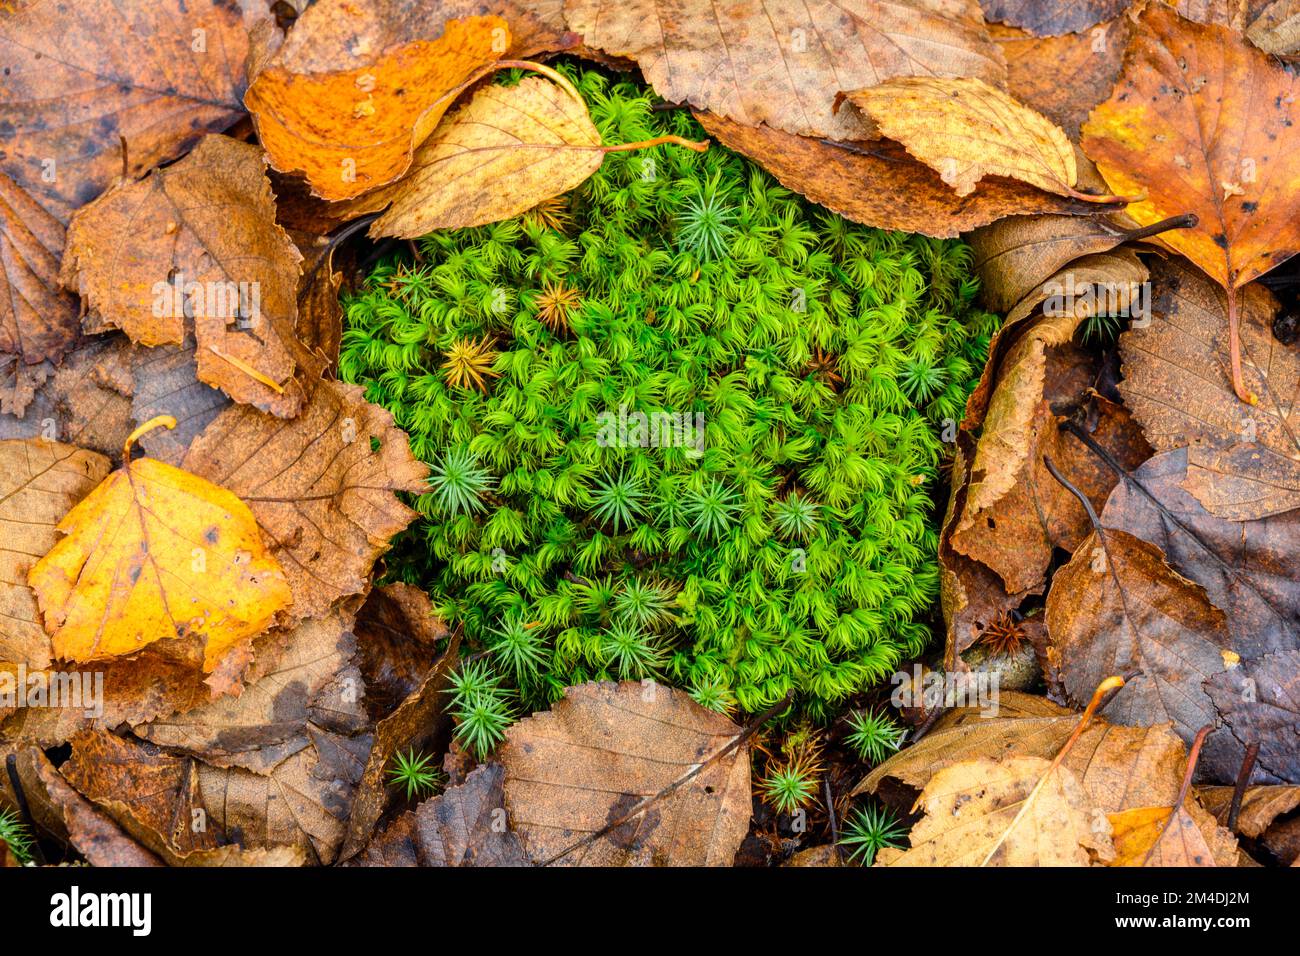 Lichen, mosses, fallen autumn leaves in a woodland clearing, Lake Superior Provincial Park- Coldwater River Bay, Ontario, Canada Stock Photo